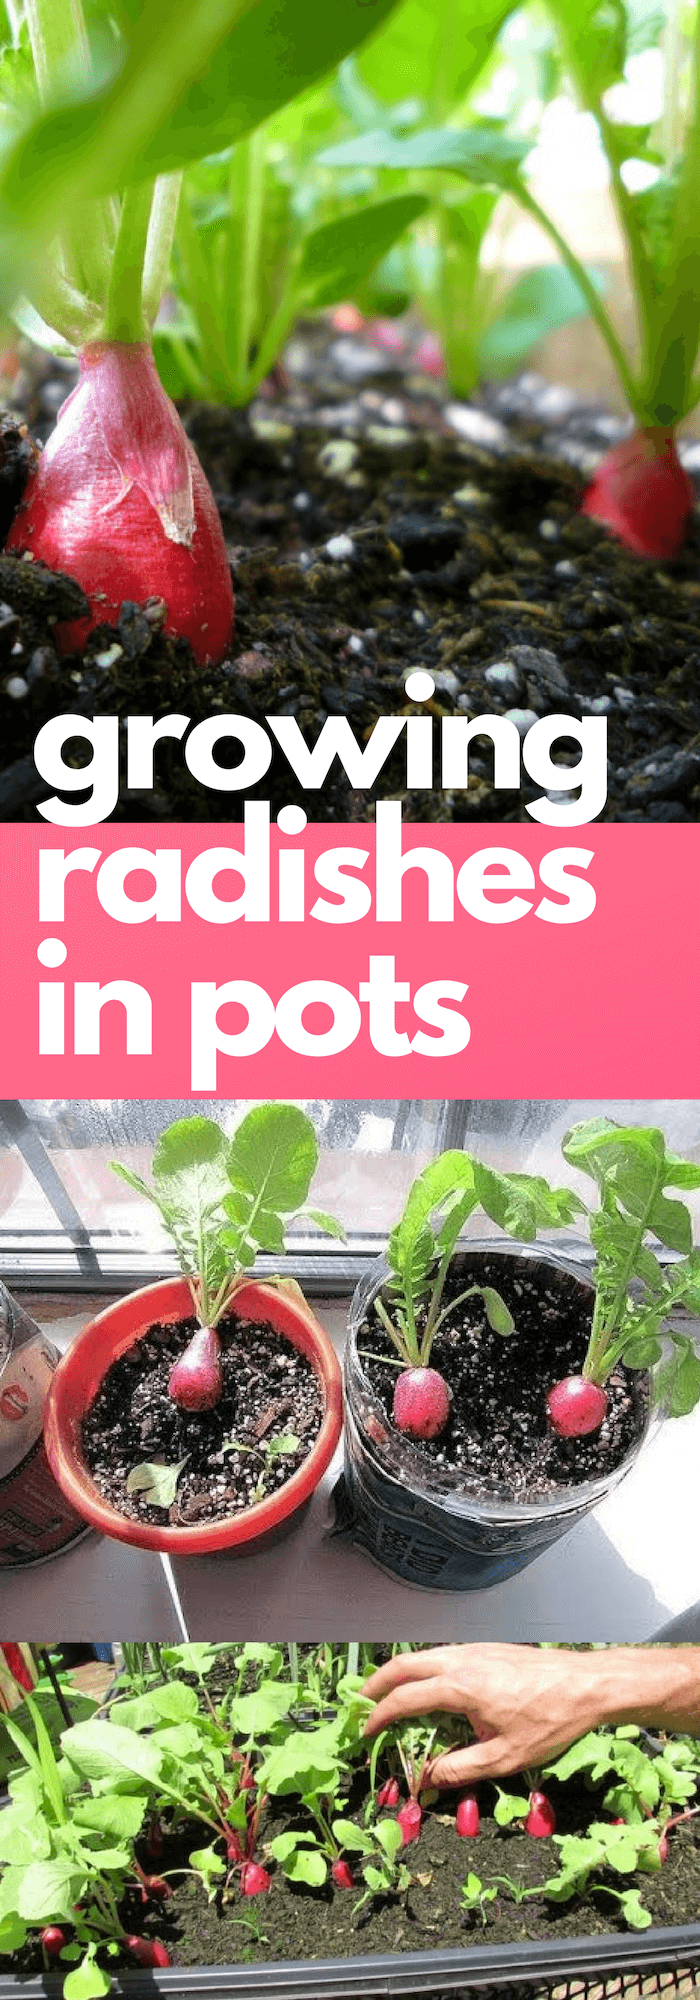 Growing radishes in pots